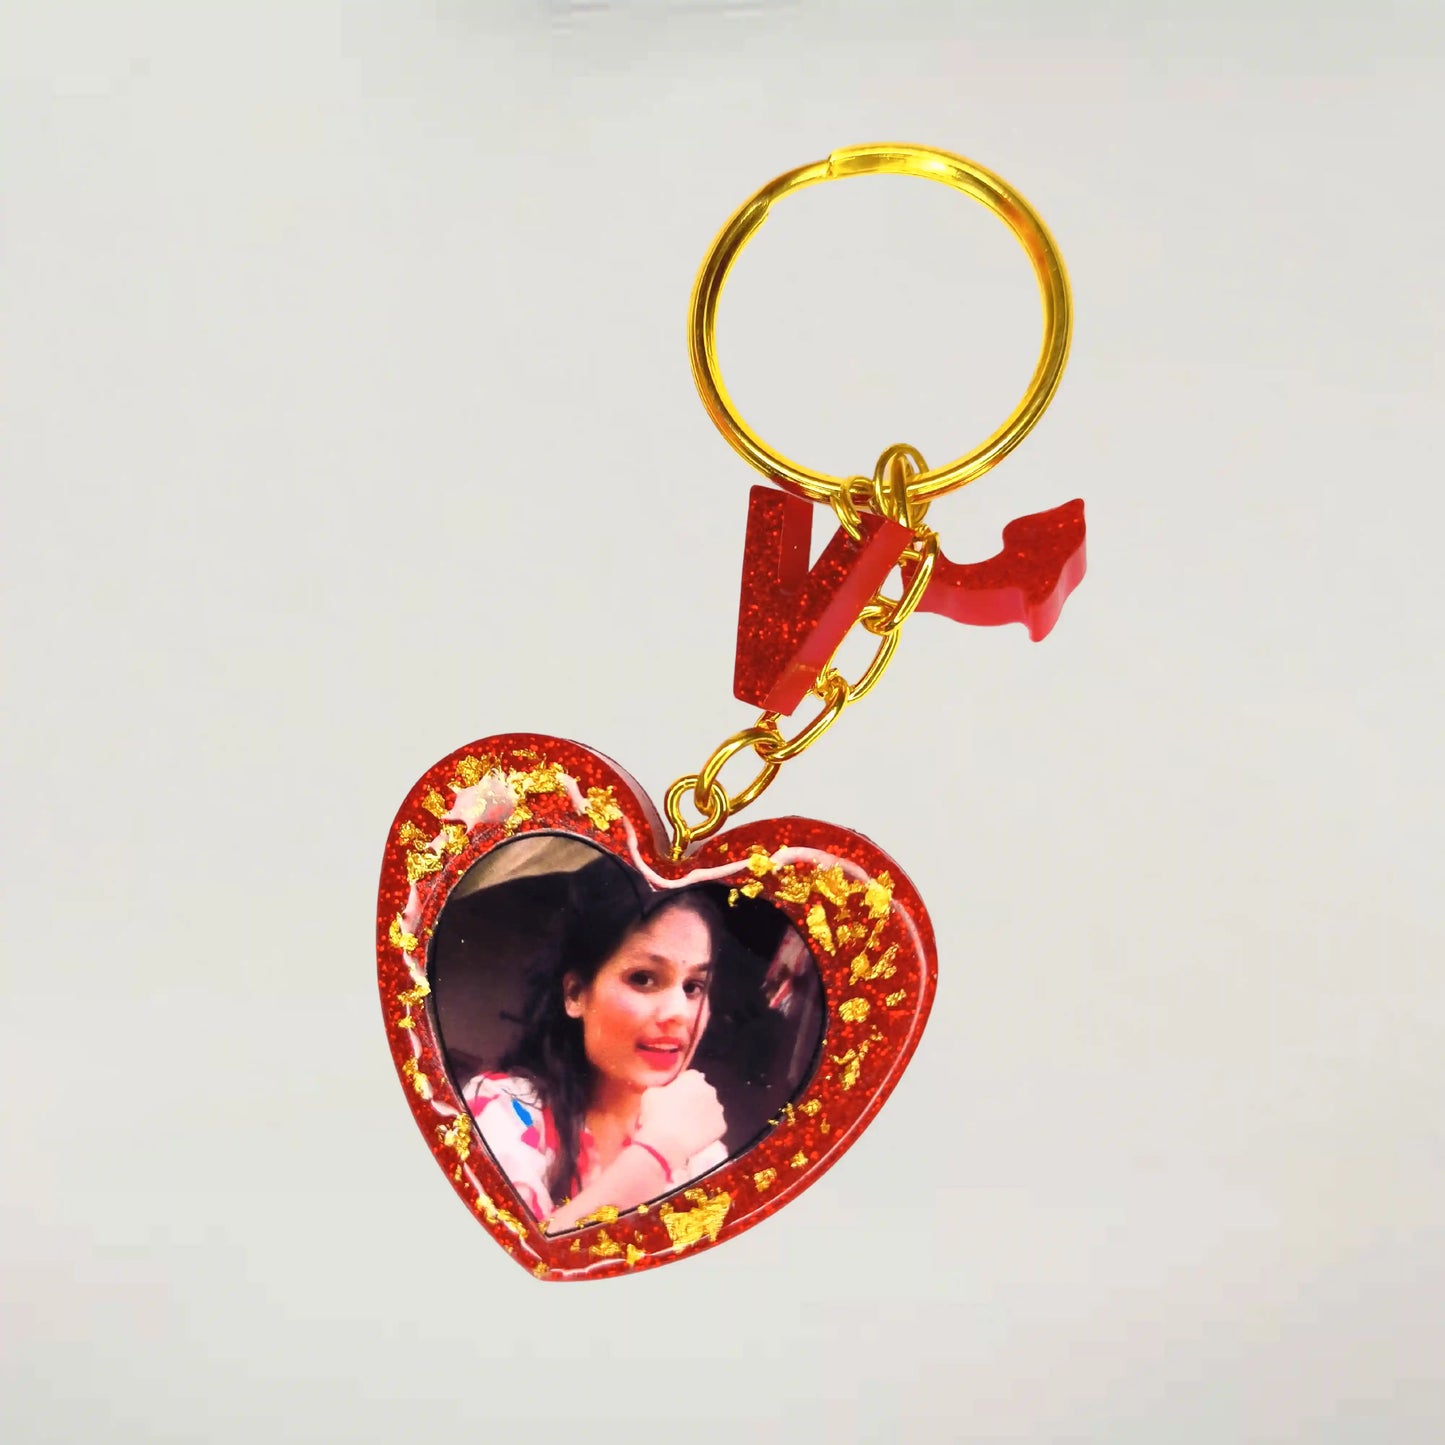 Heart-Shaped Photo Resin Keychains With Personalized Monogram for Girlfriend